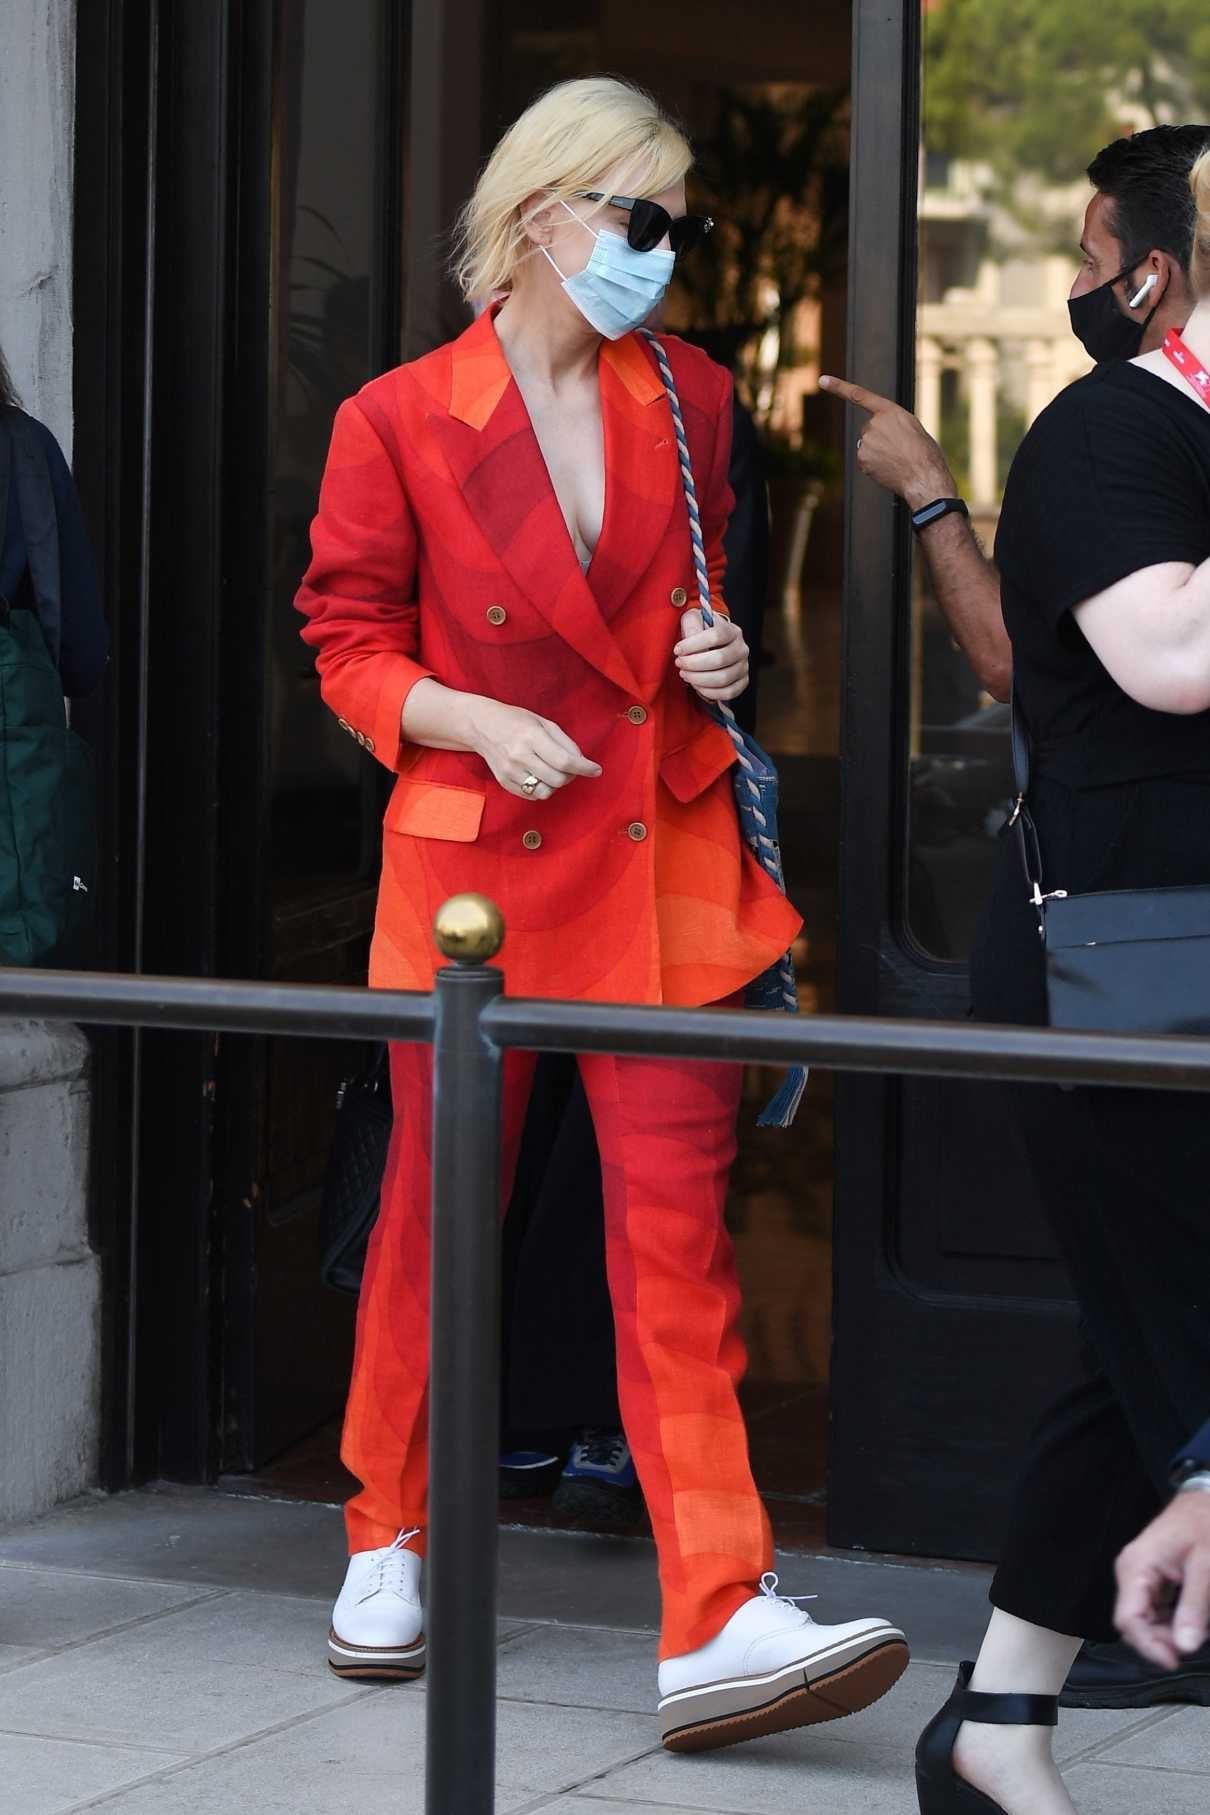 Cate Blanchett in a Red Suit